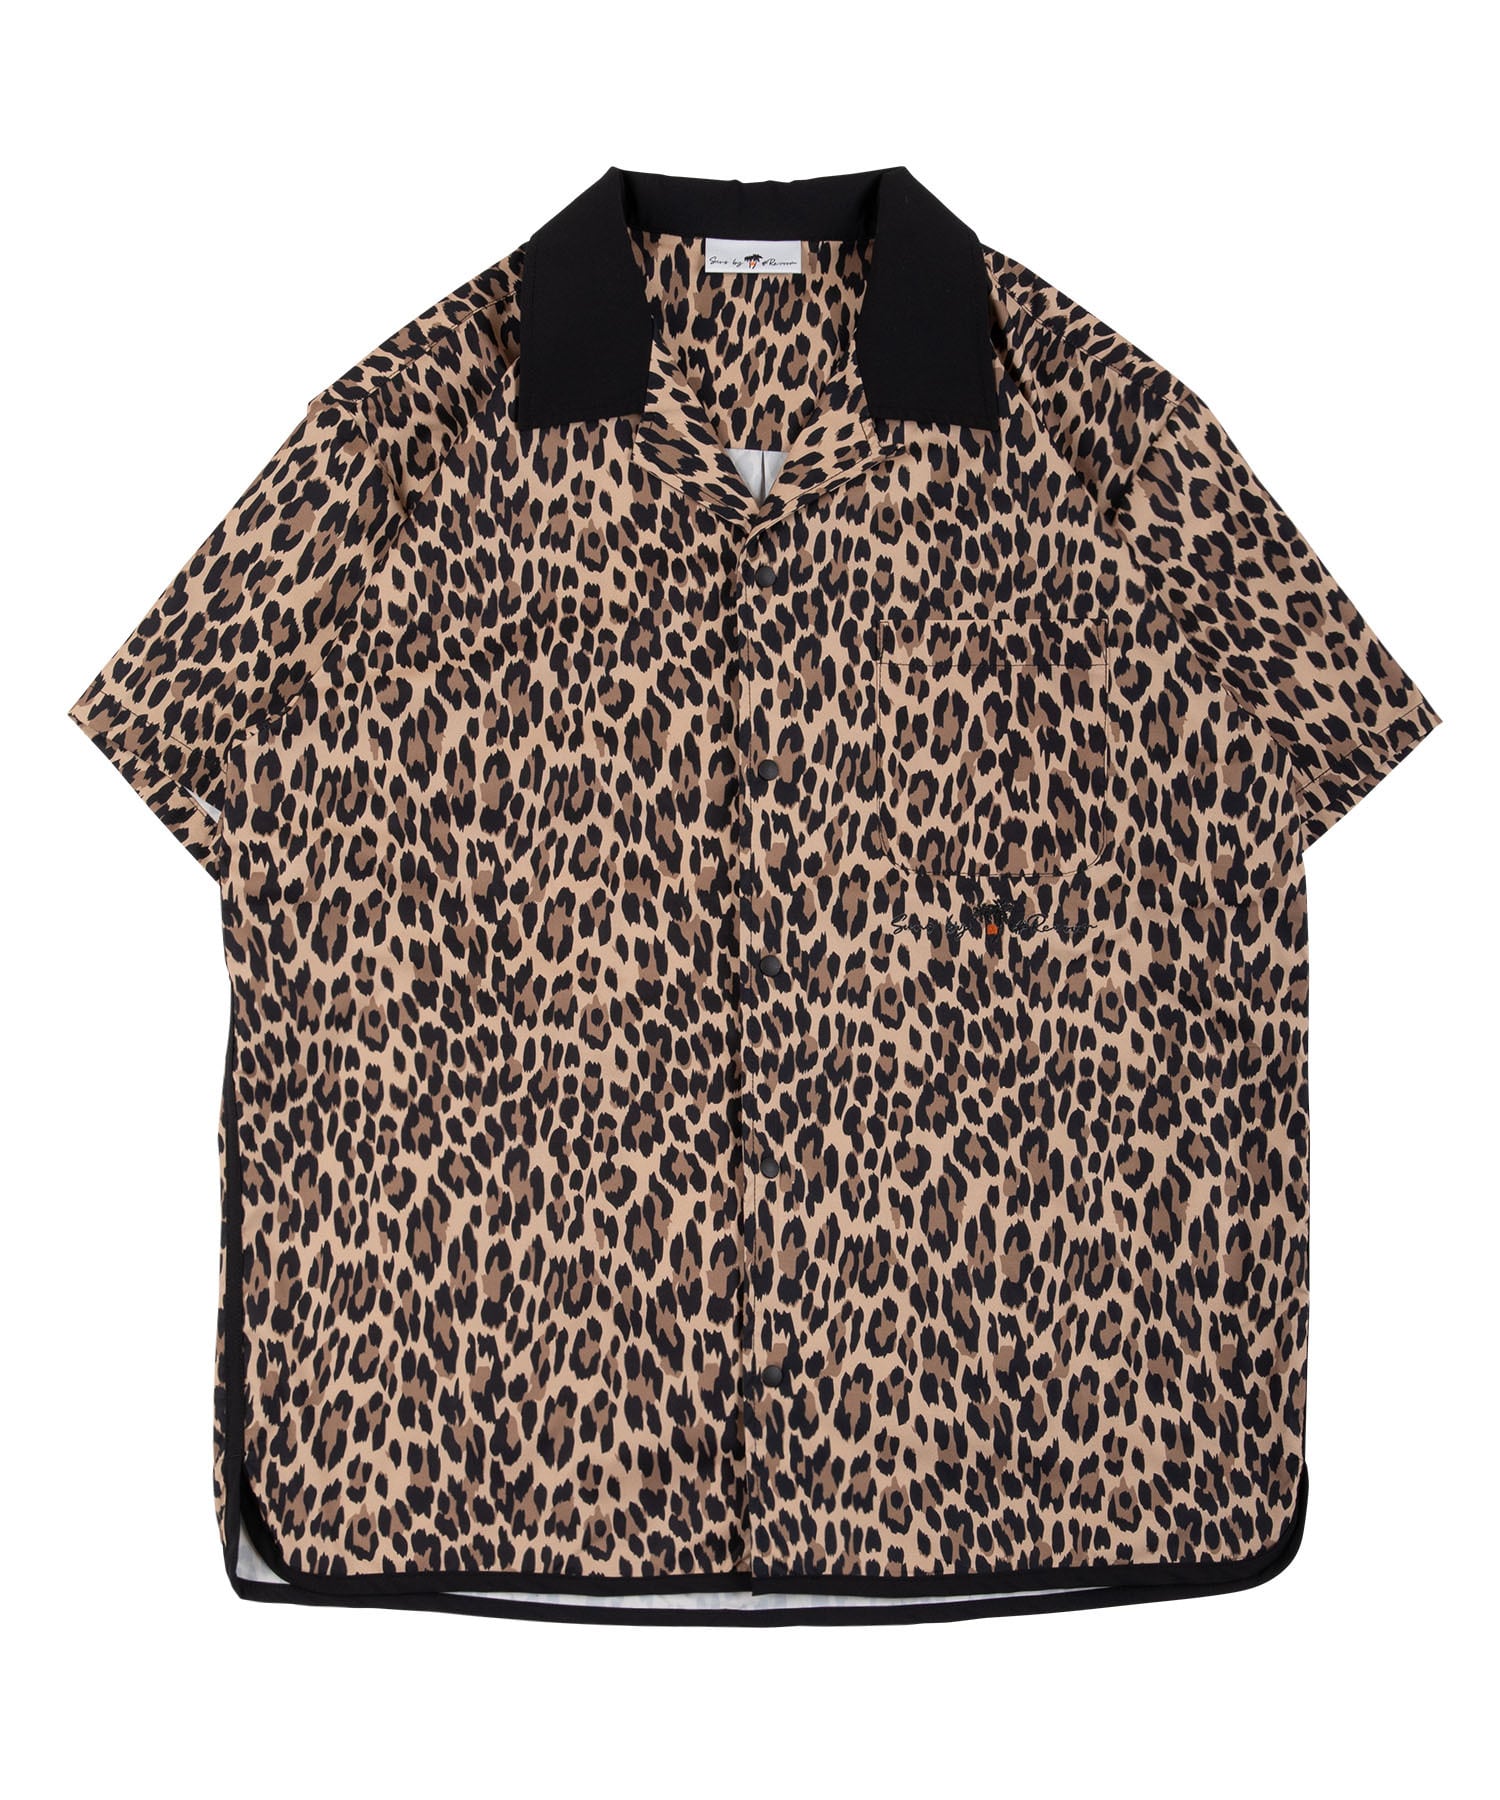 SUNS】LEOPARD OPEN COLLAR SHIRTS［RSS012］ | #Re:room（リルーム）